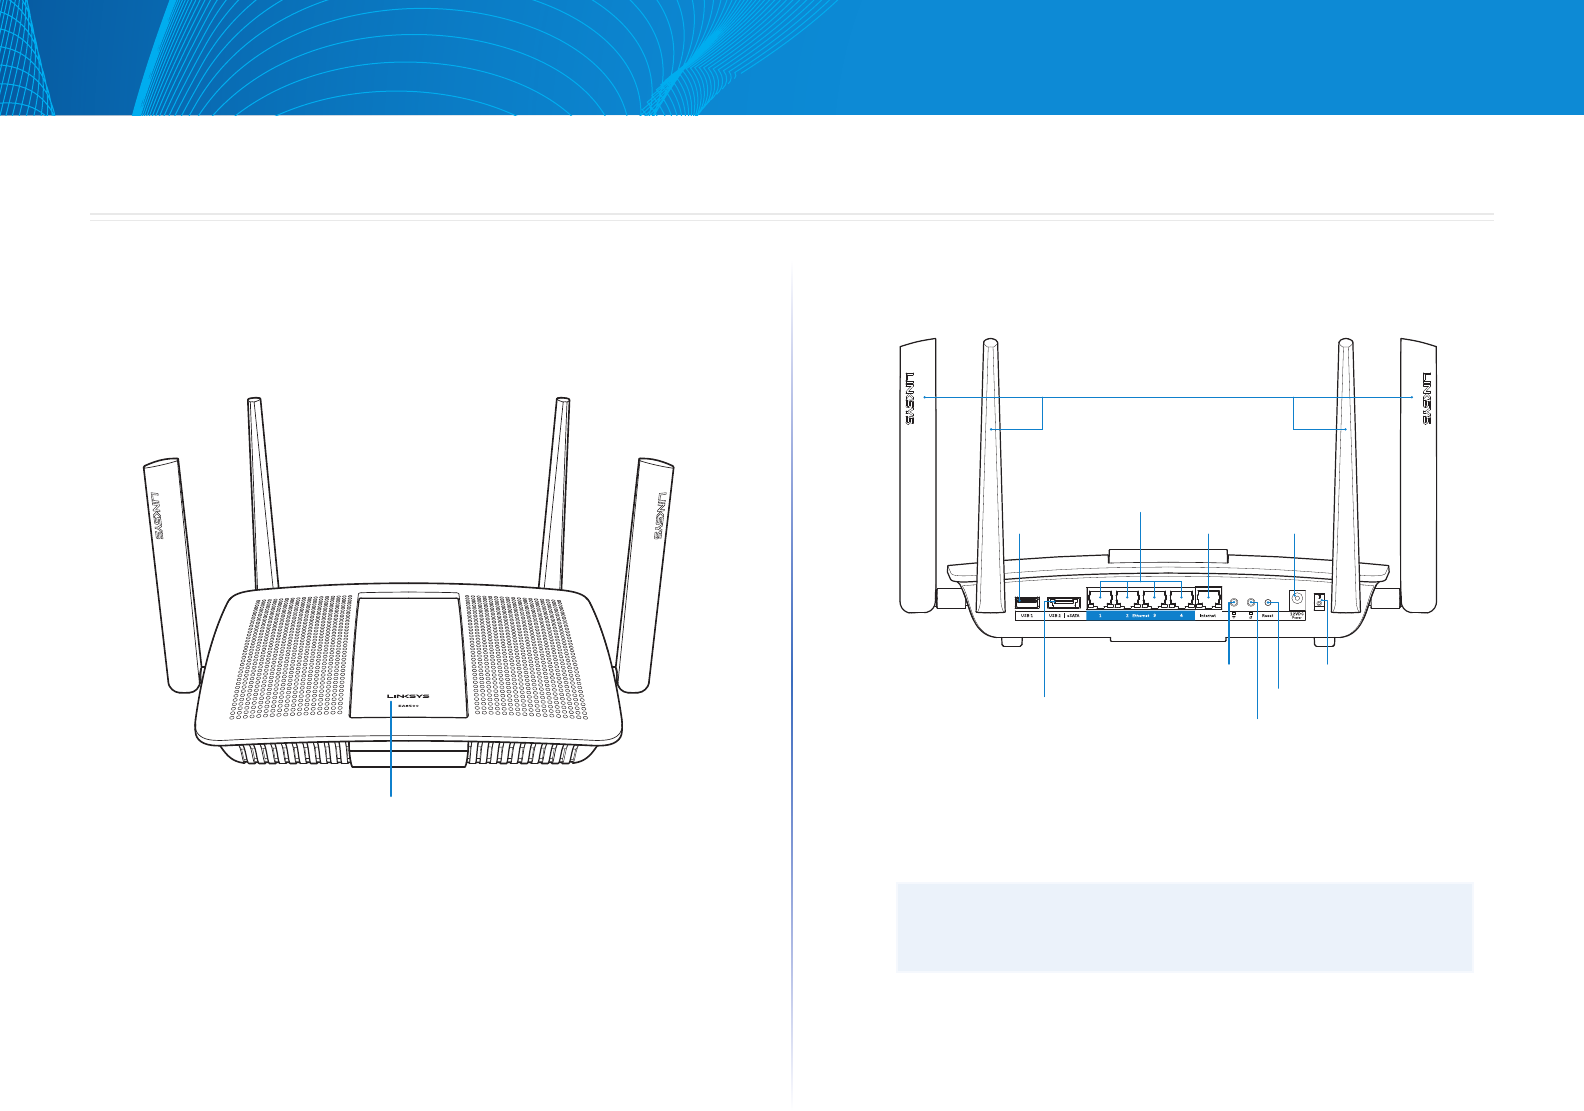 LINKSYS EA8500 LINKSYS DUAL-BAND WIRELESS-AC ROUTER User Manual